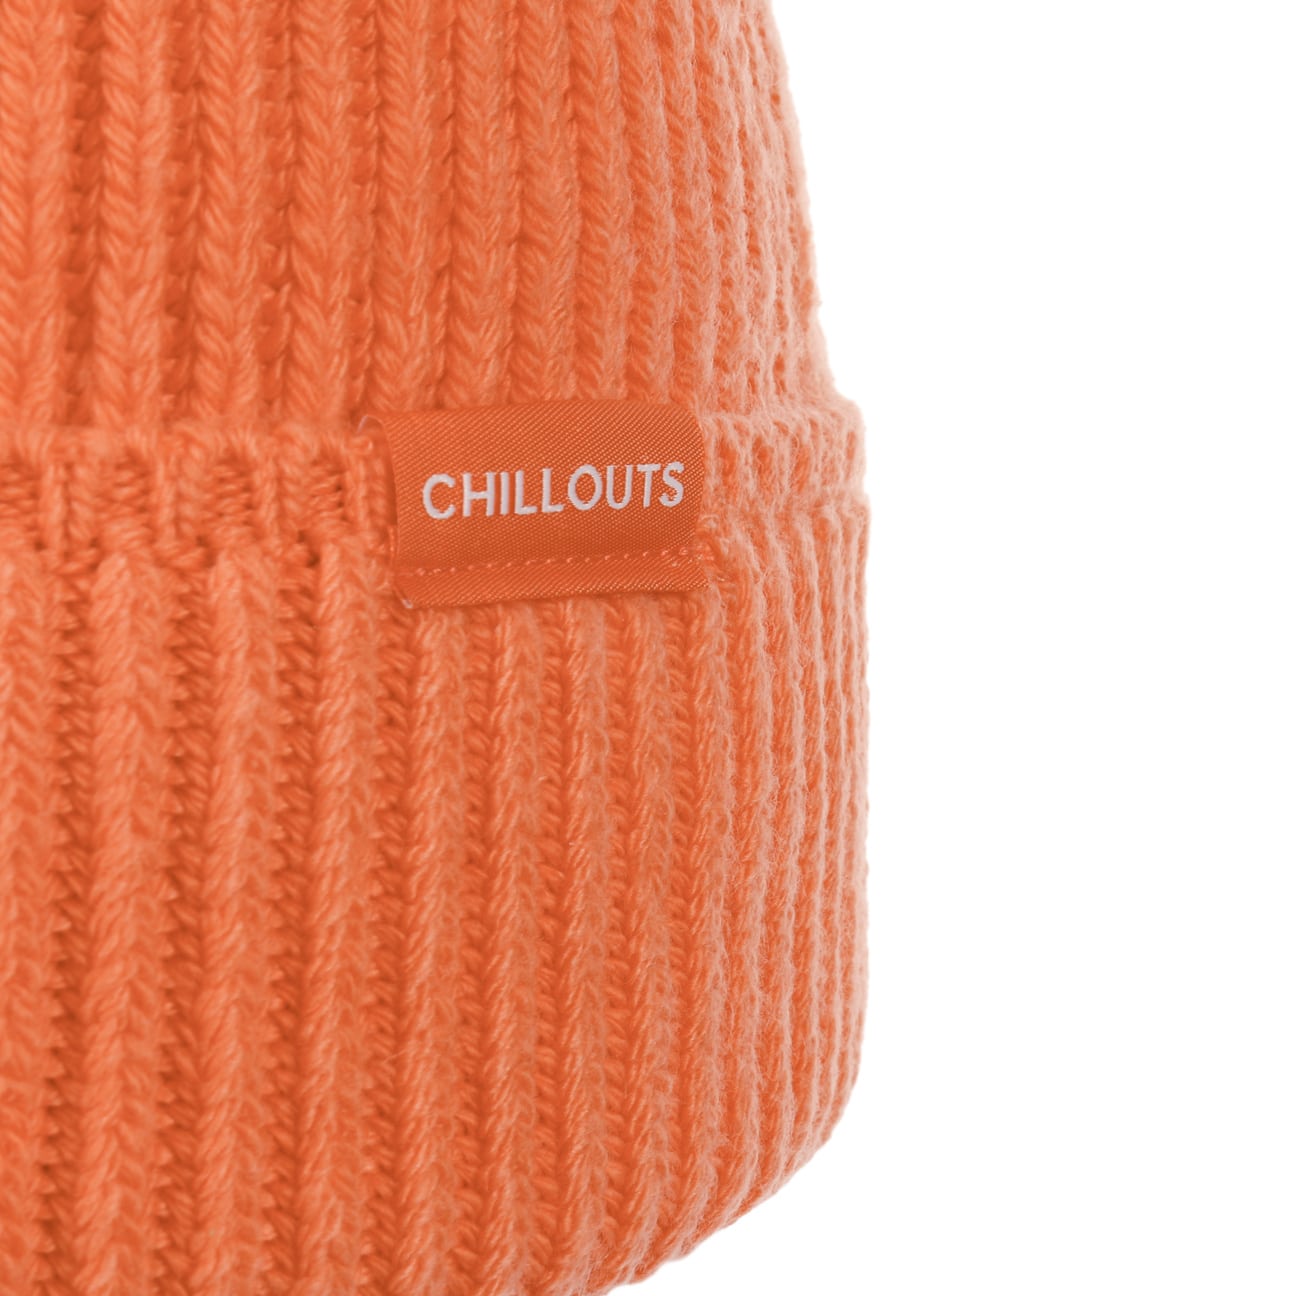 Wool 29,99 Meets by - Chillouts € Umschlagmütze Cotton